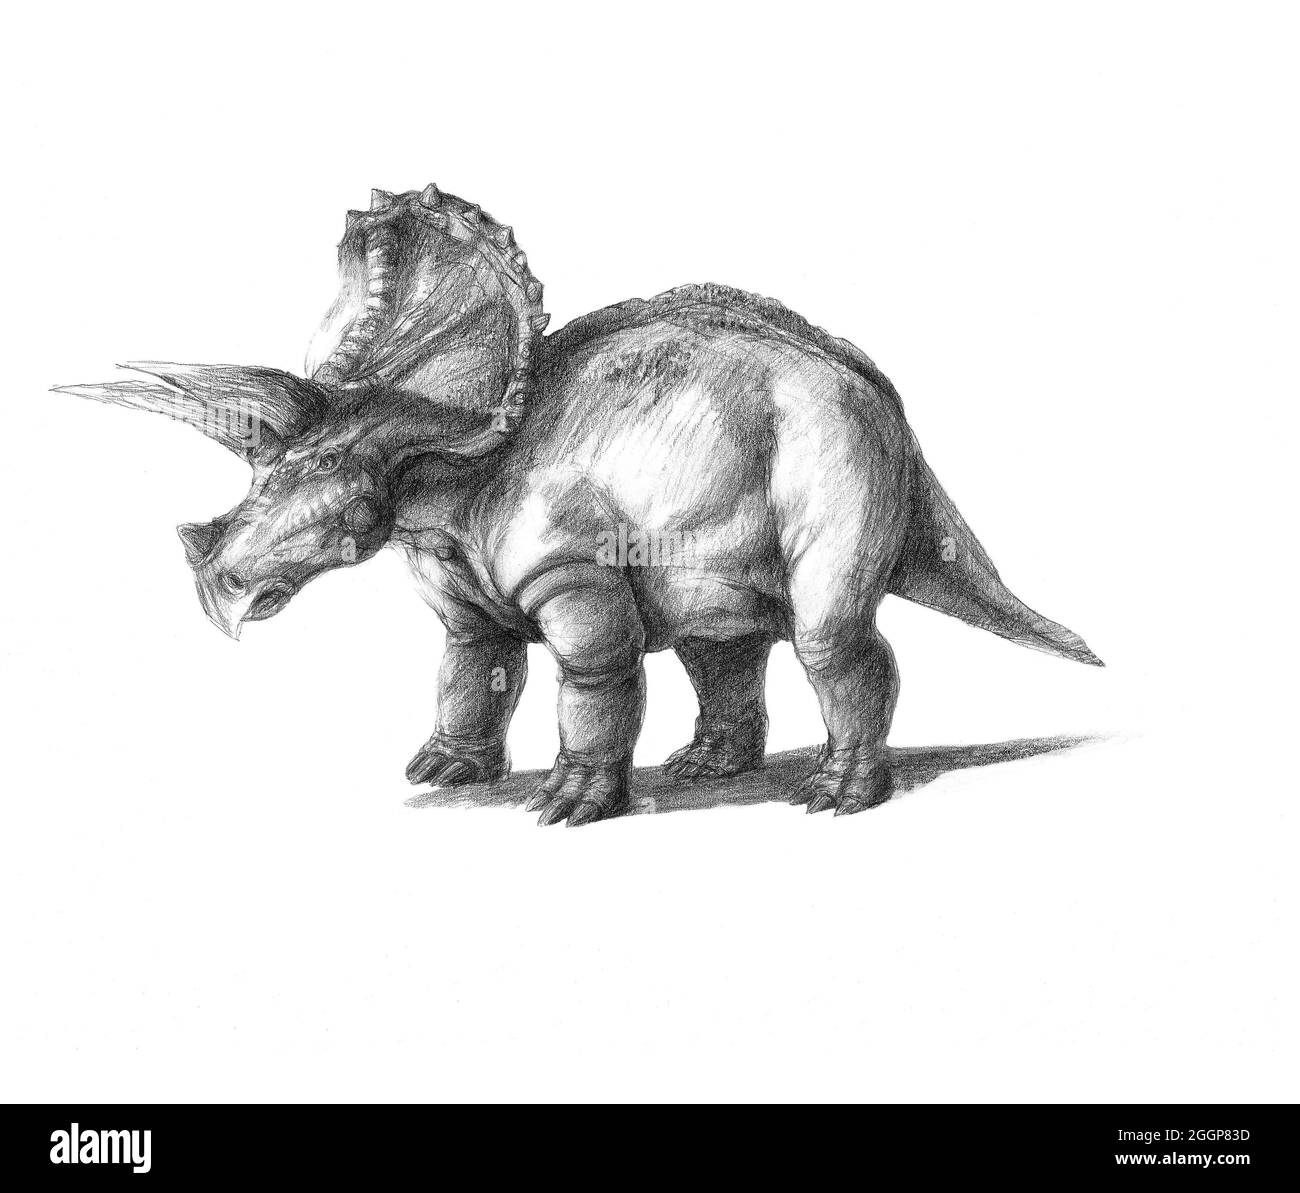 Illustration of Triceratops.  Triceratops is a genus of herbivorous ceratopsid dinosaur which lived during the late Maastrichtian stage of the Late Cretaceous Period, in North America. Stock Photo